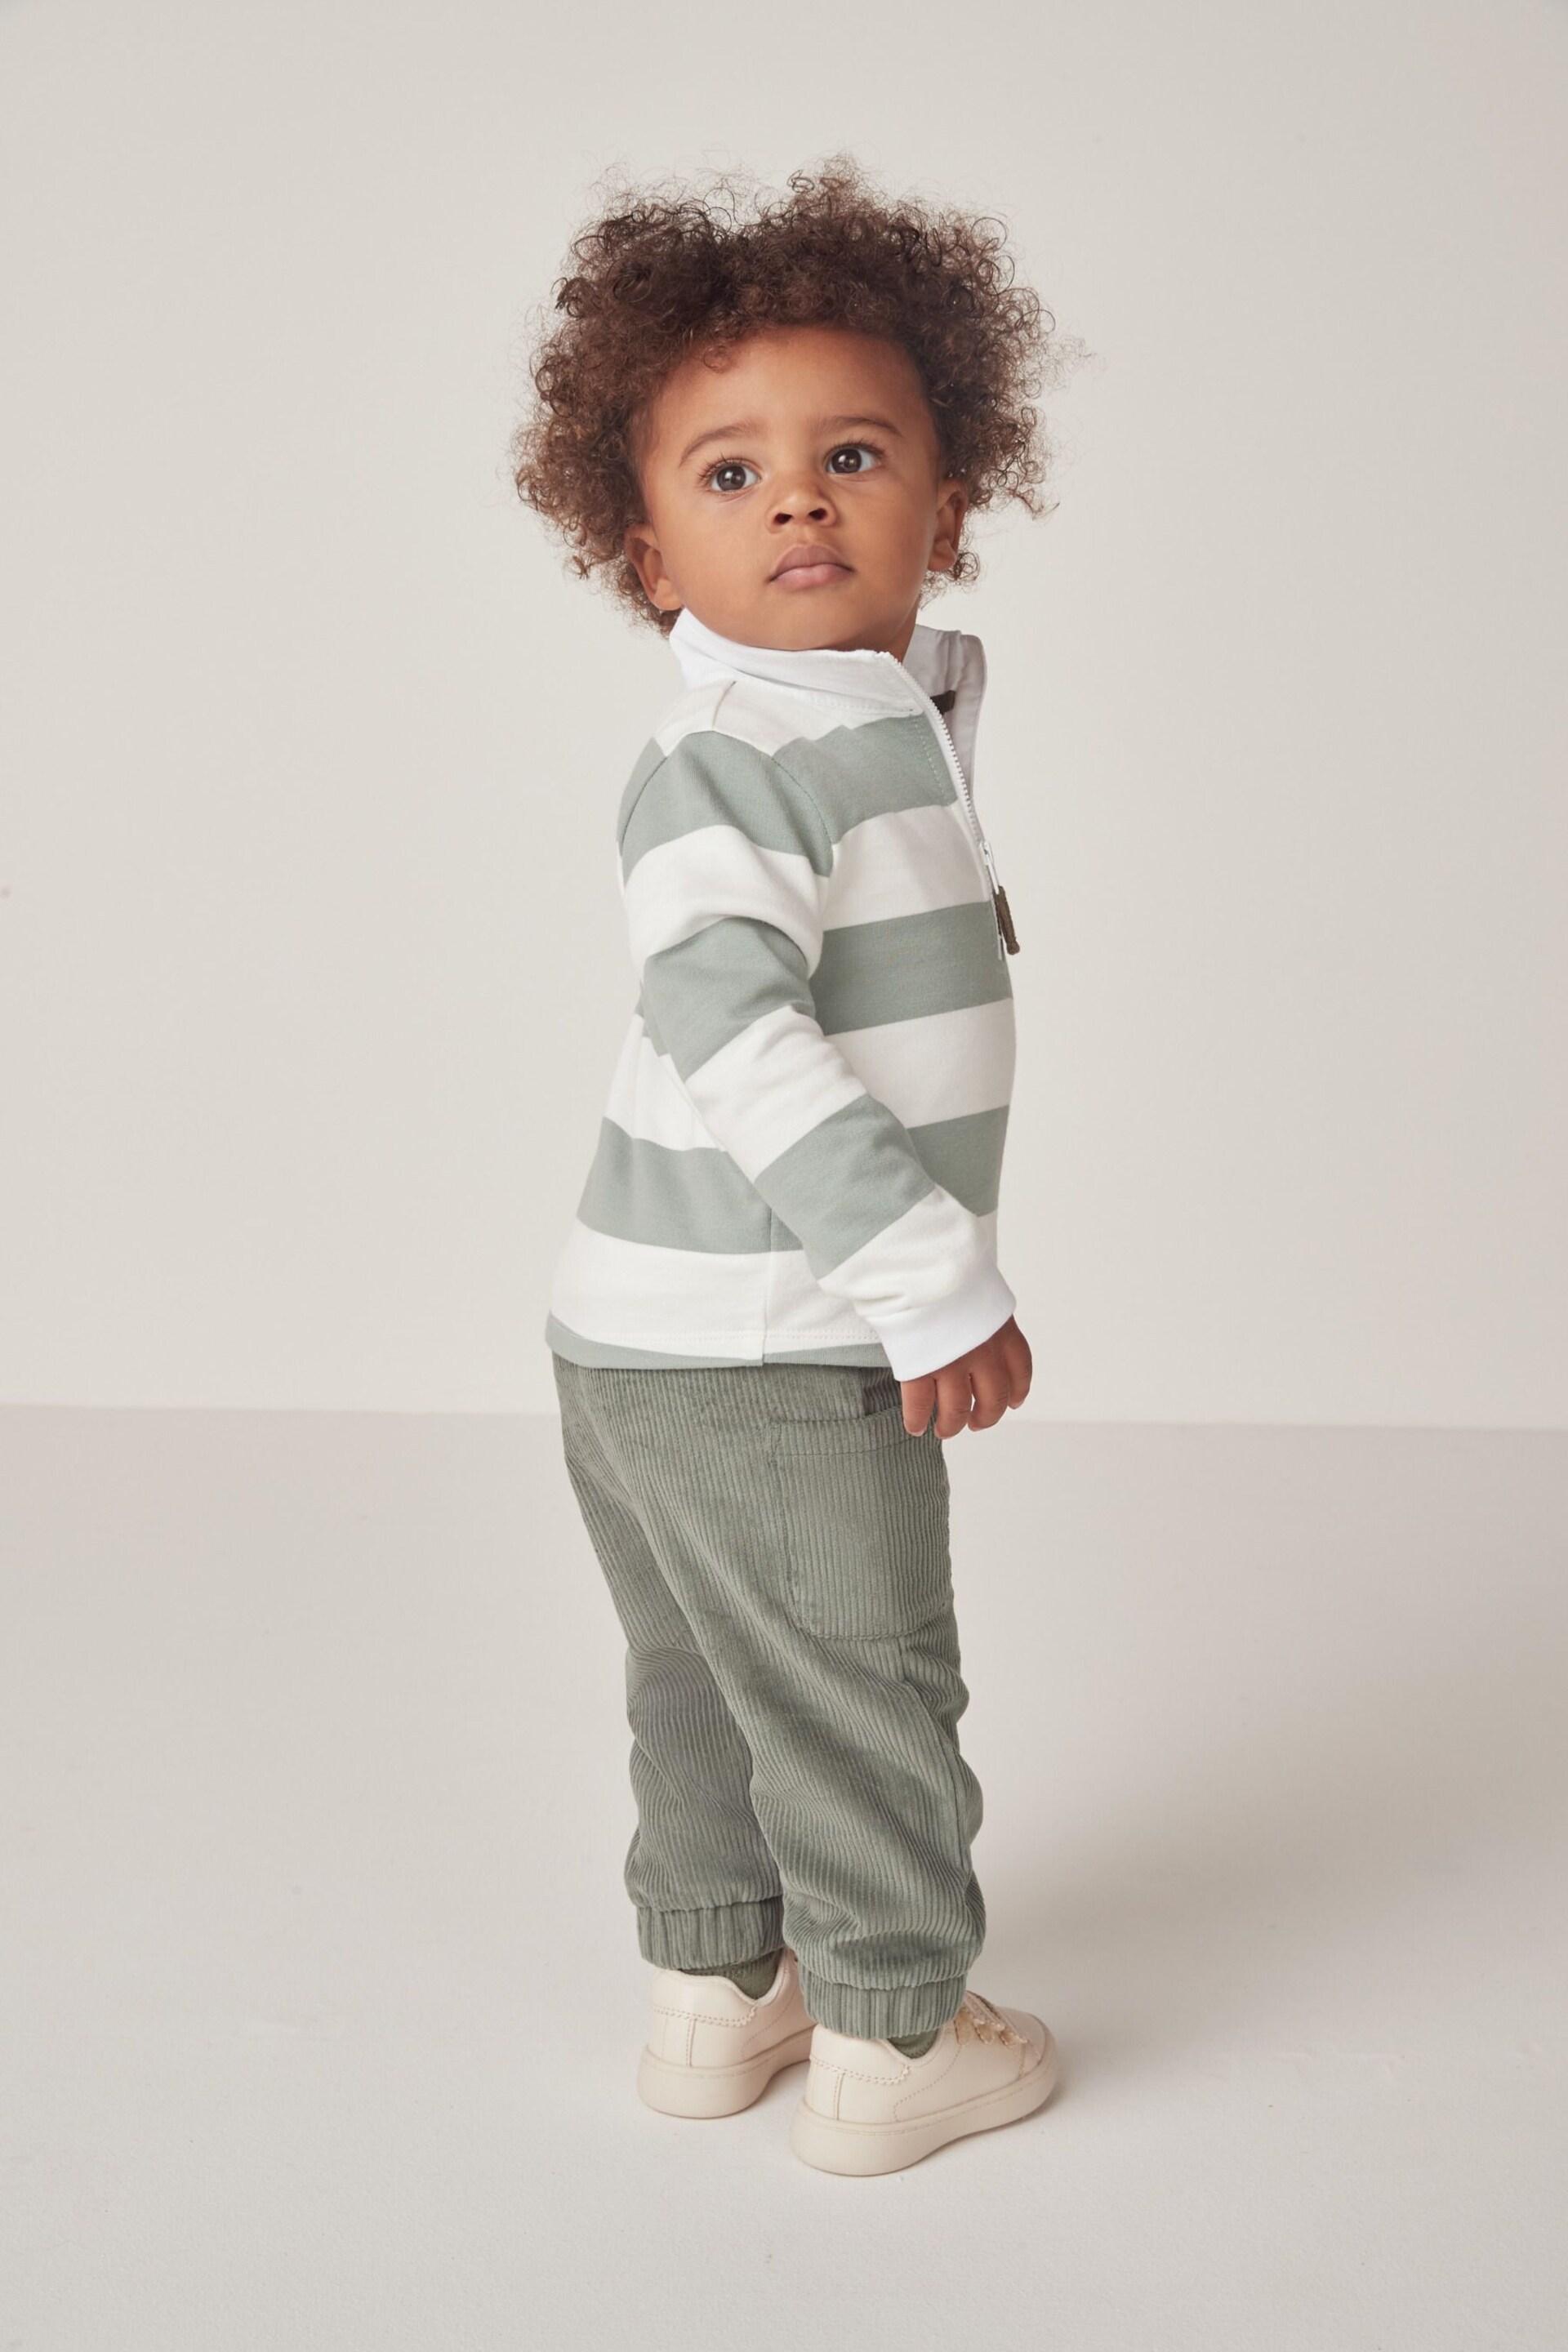 The White Company Green Cotton Rugby Shirt & Cord Trouser Set - Image 2 of 10